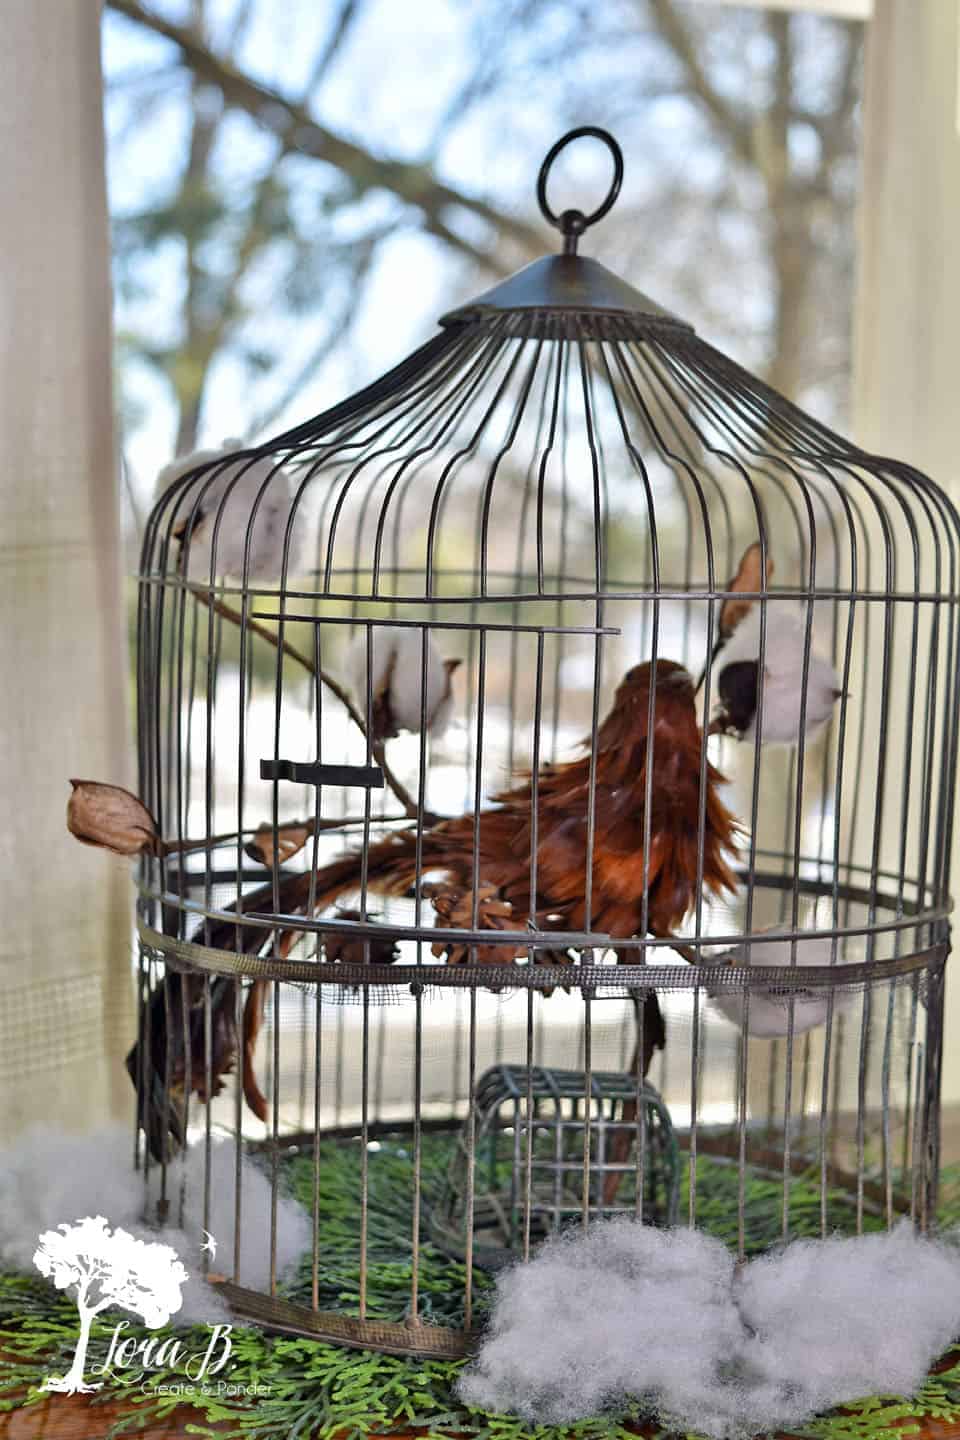 12 Ways To Decorate A Vintage Birdcage For Winter Lora B Create